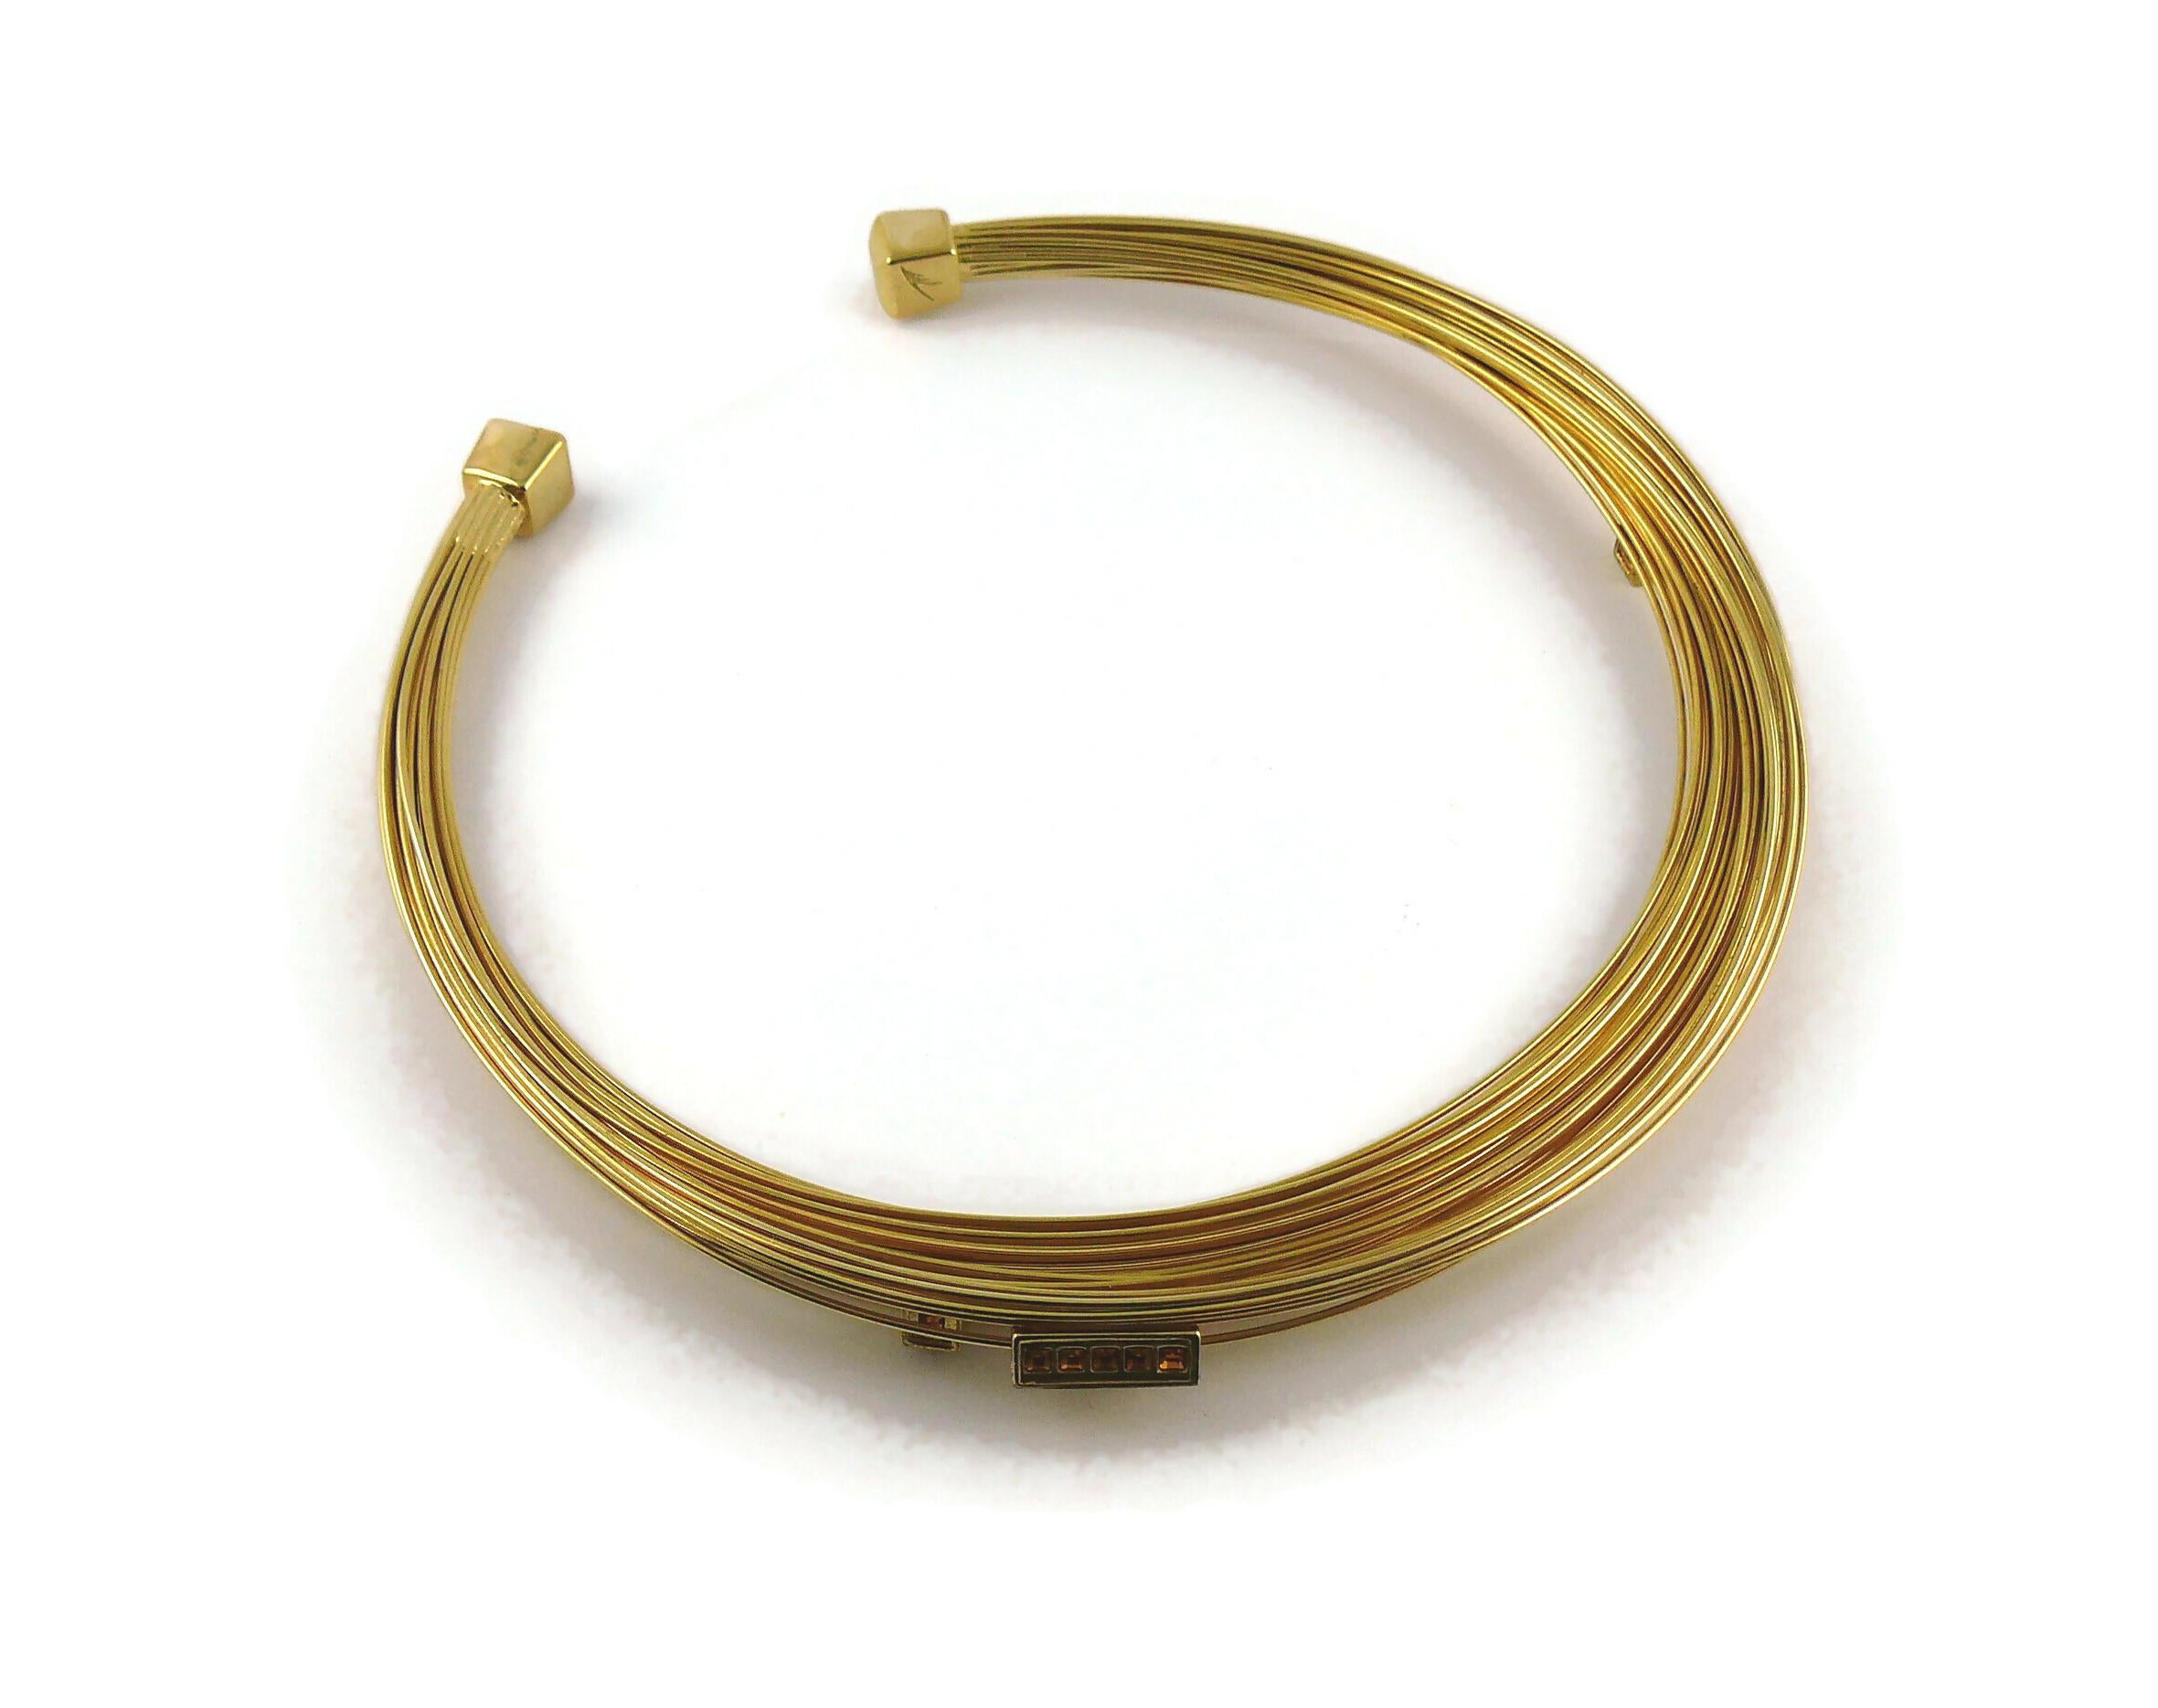 Thierry Mugler Gold Toned Bundled Wires Choker Necklace For Sale 3